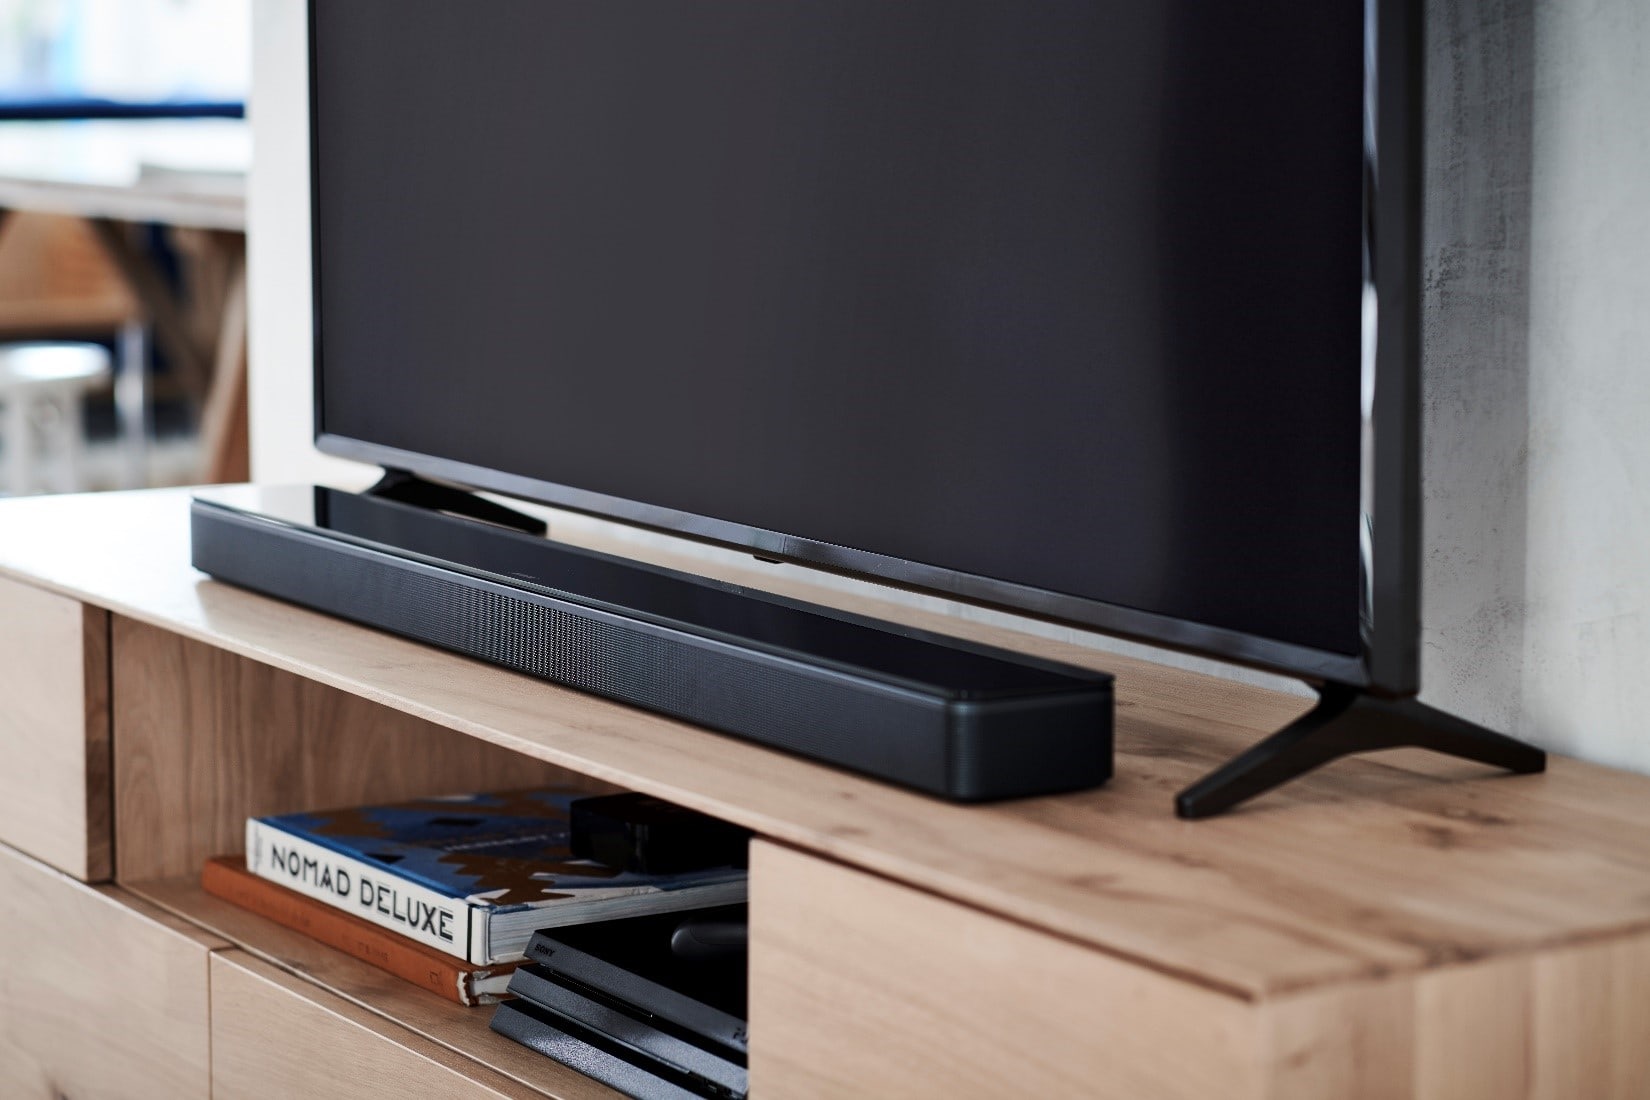 Make Your Home Smart with Speakers and Soundbars from Bose